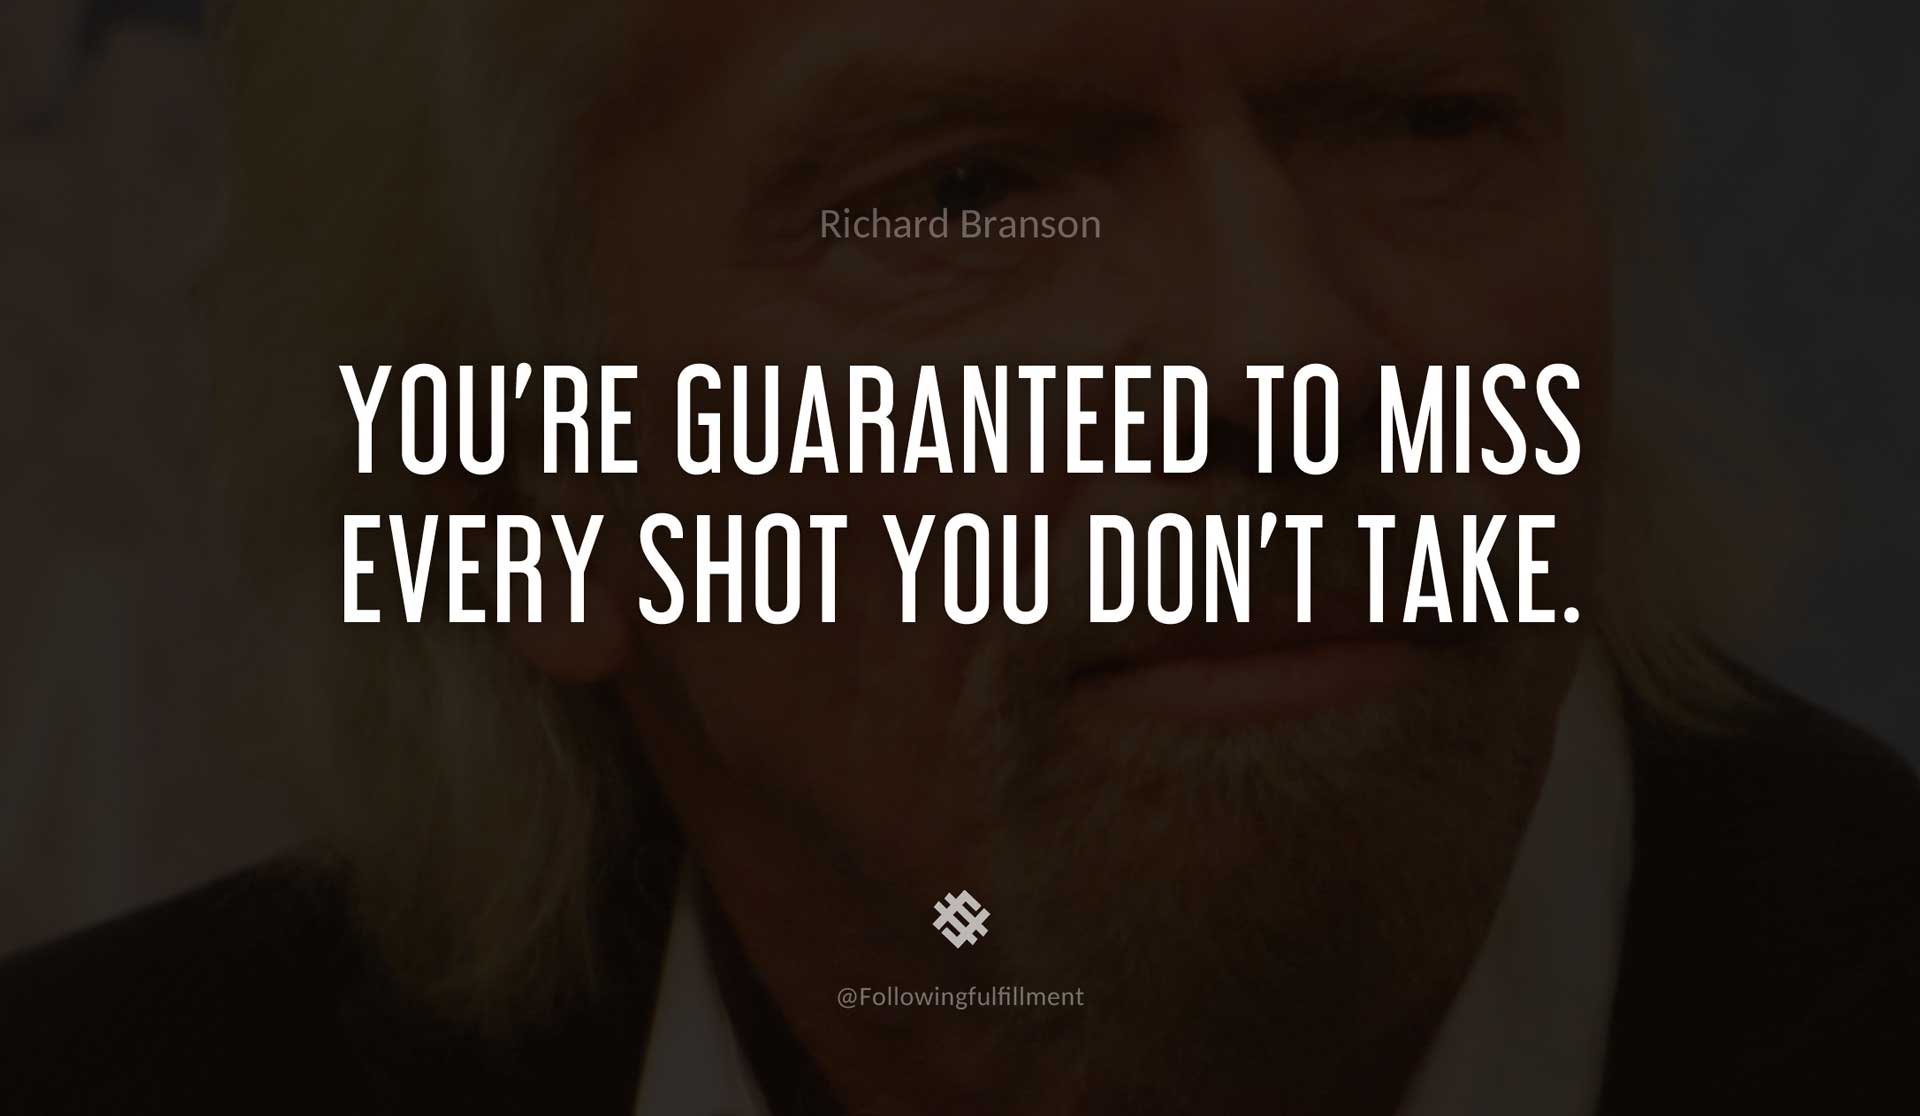 You're-guaranteed-to-miss-every-shot-you-don't-take.-RICHARD-BRANSON-Quote.jpg